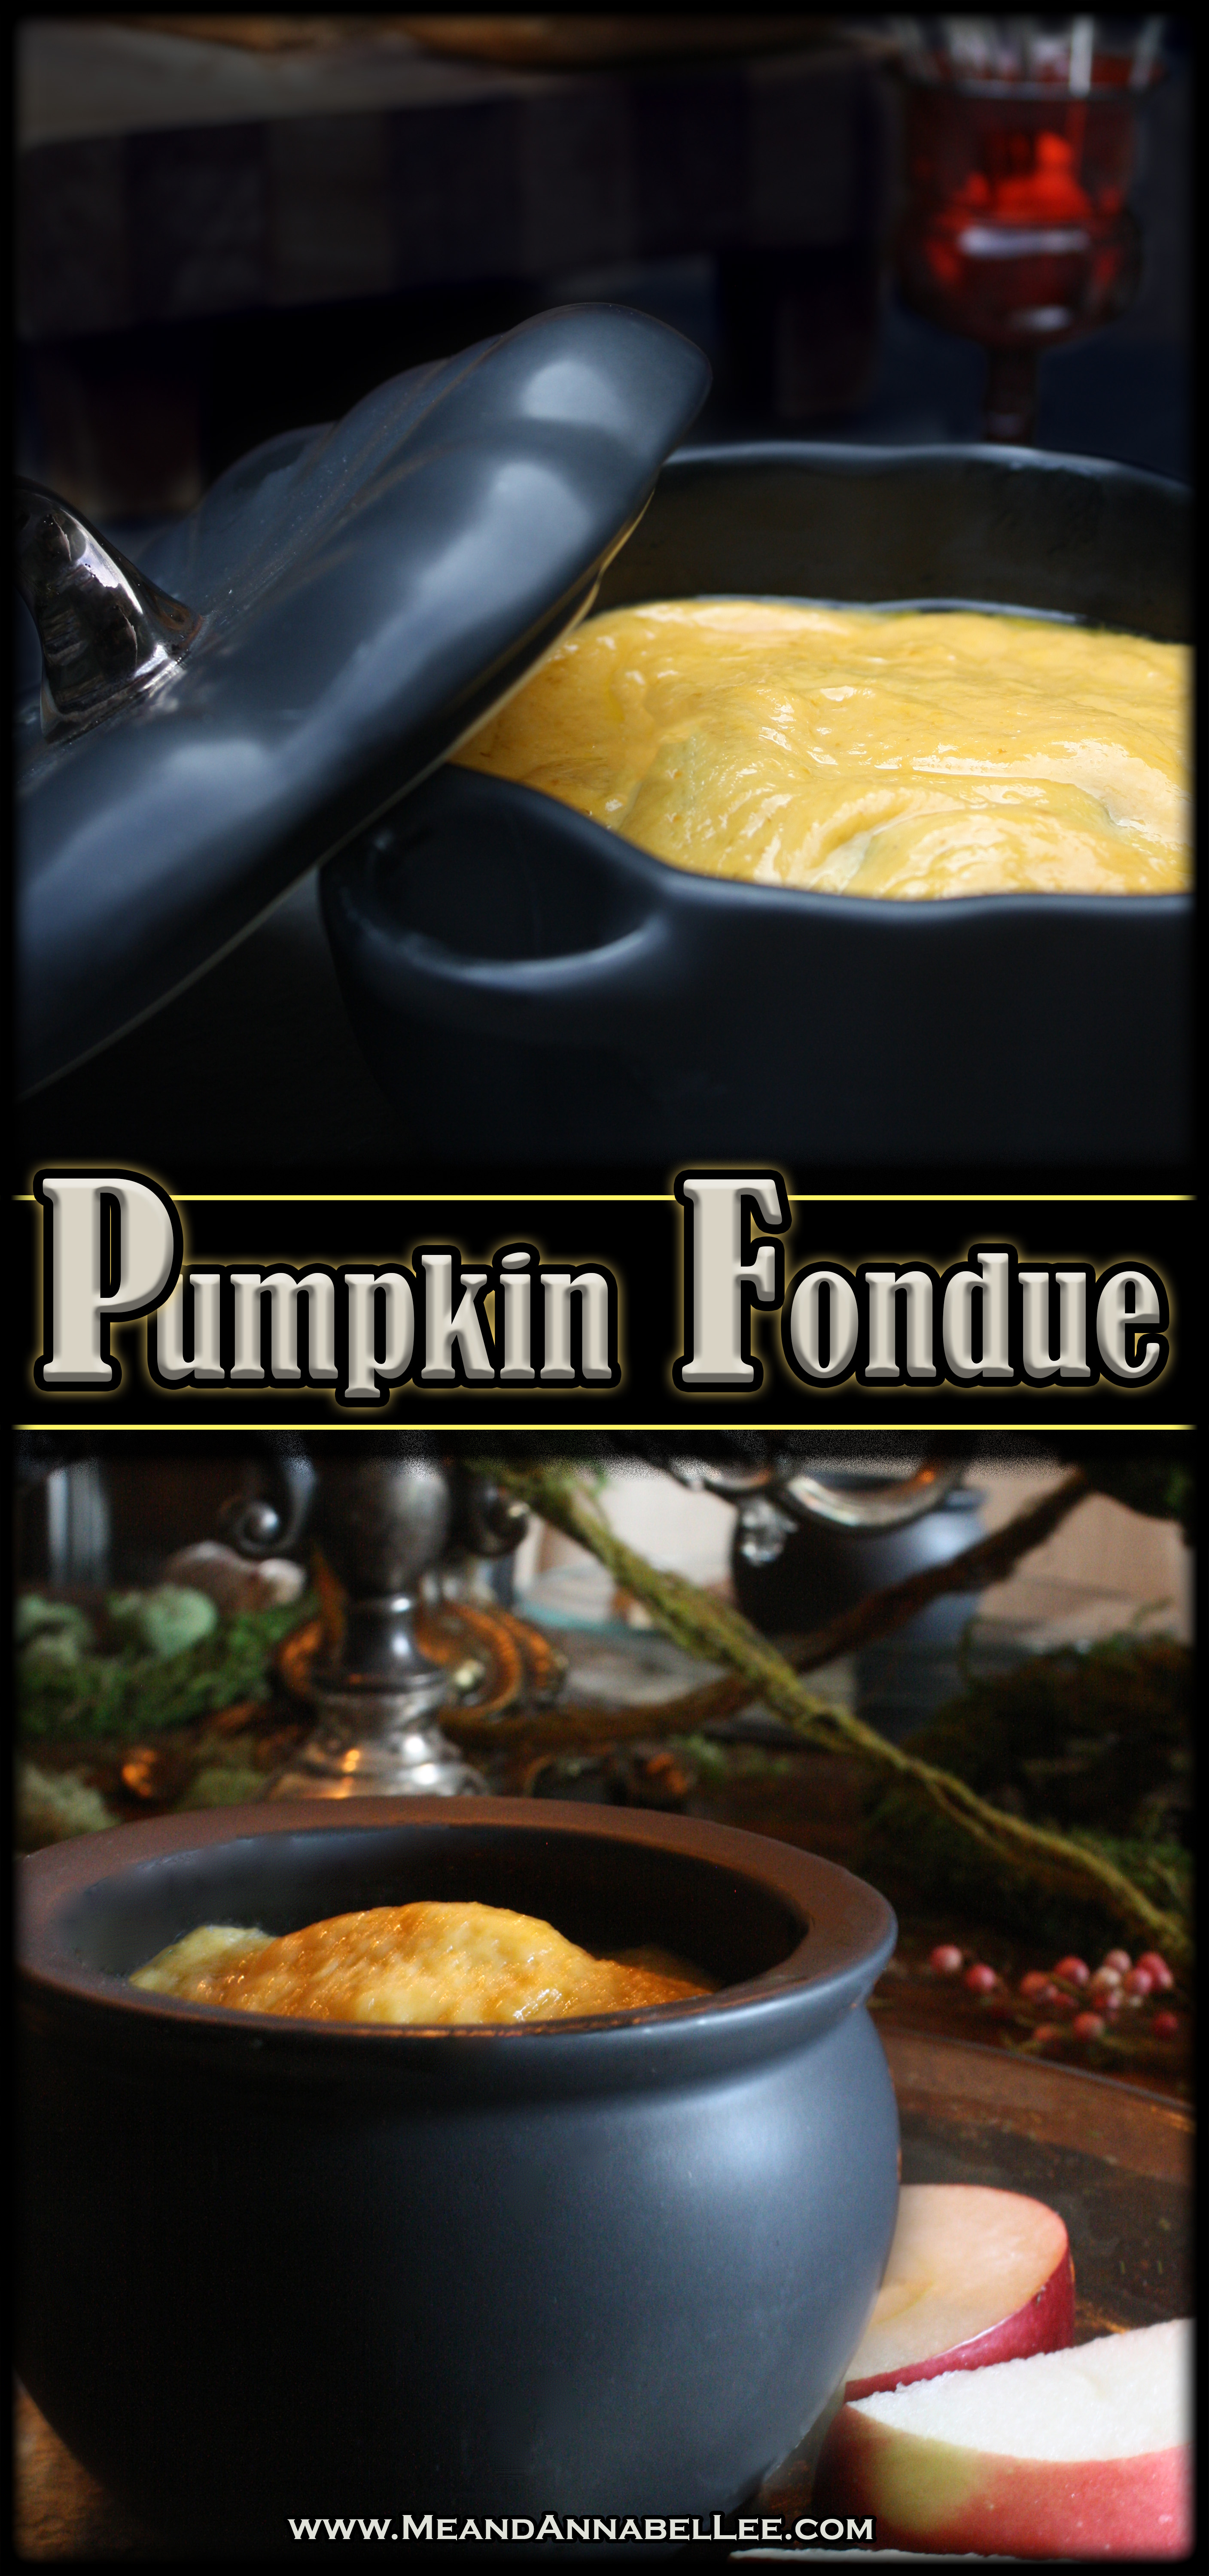 Pumpkin Fondue …. Classic Cheese Fondue with a Pumpkin Twist | Fall Recipes | An appetizer for your Thanksgiving or Halloween Dinner Party | Serve in a Cauldron, a Black Cast Iron Pumpkin Cocotte, or a Knucklehead Pumpkin to add a dark edge to the presentation | Me and Annabel Lee Blog